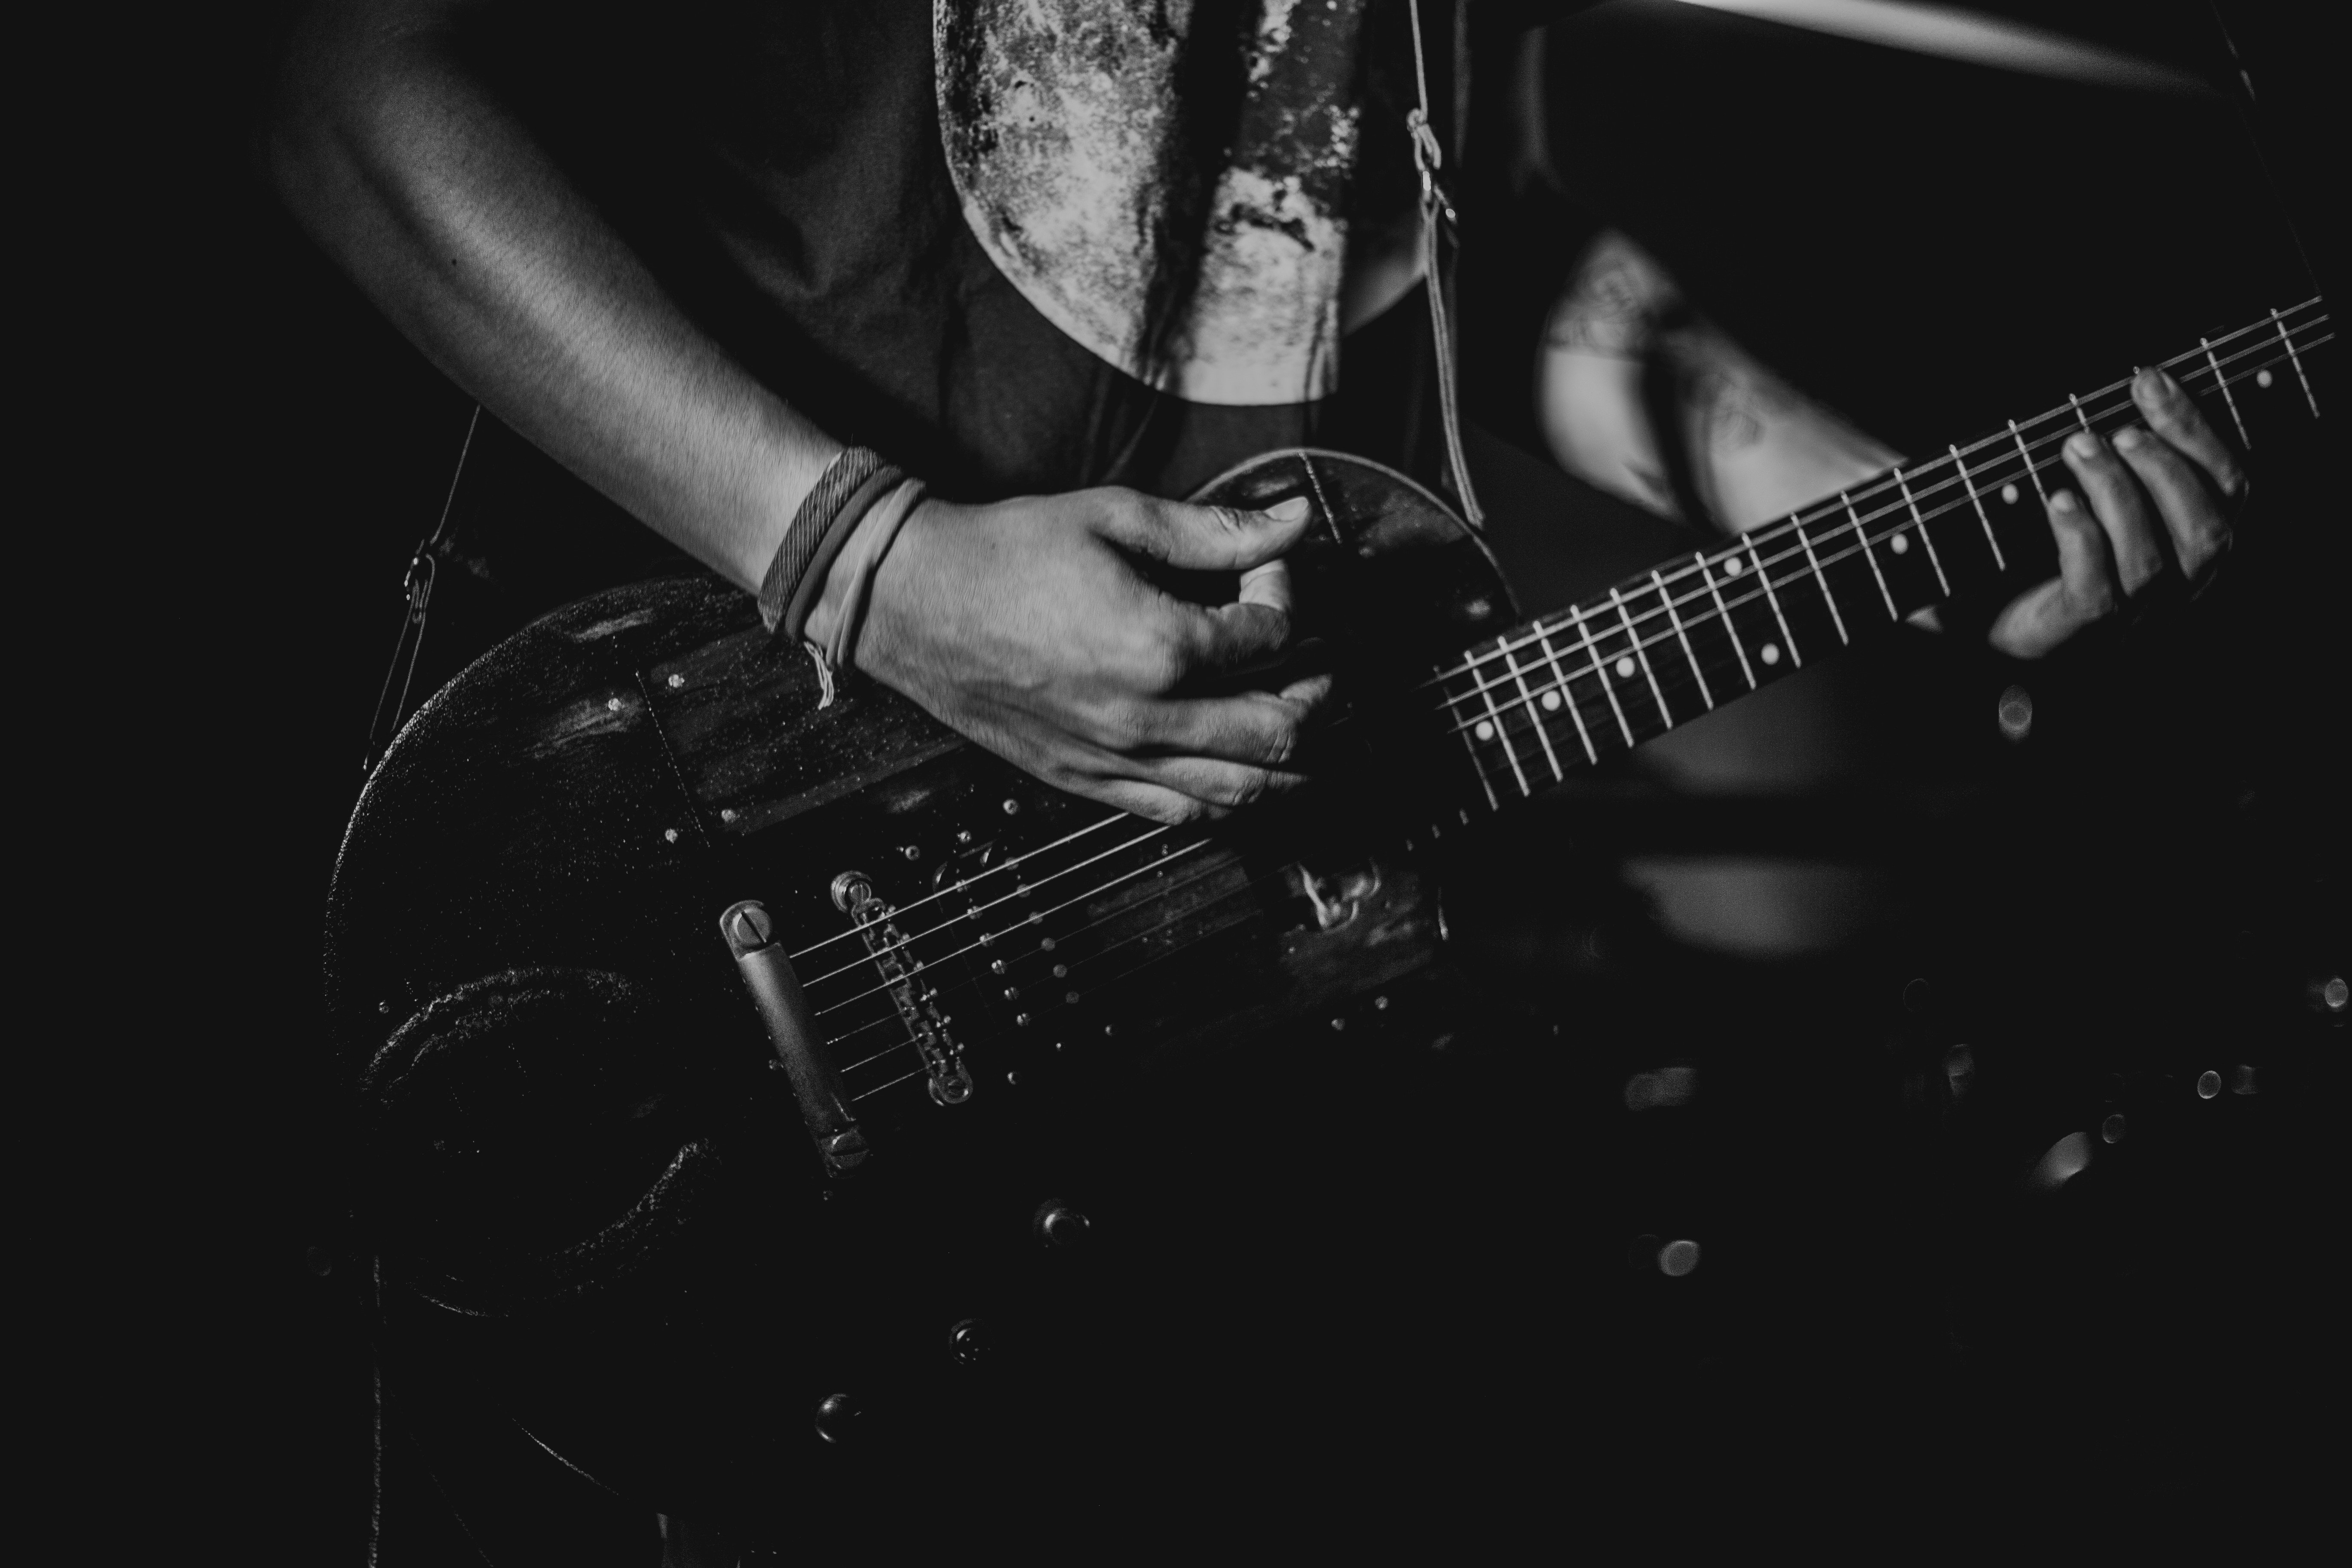 108962 download wallpaper music, guitar, musical instrument, bw, chb, guitar player, guitarist screensavers and pictures for free